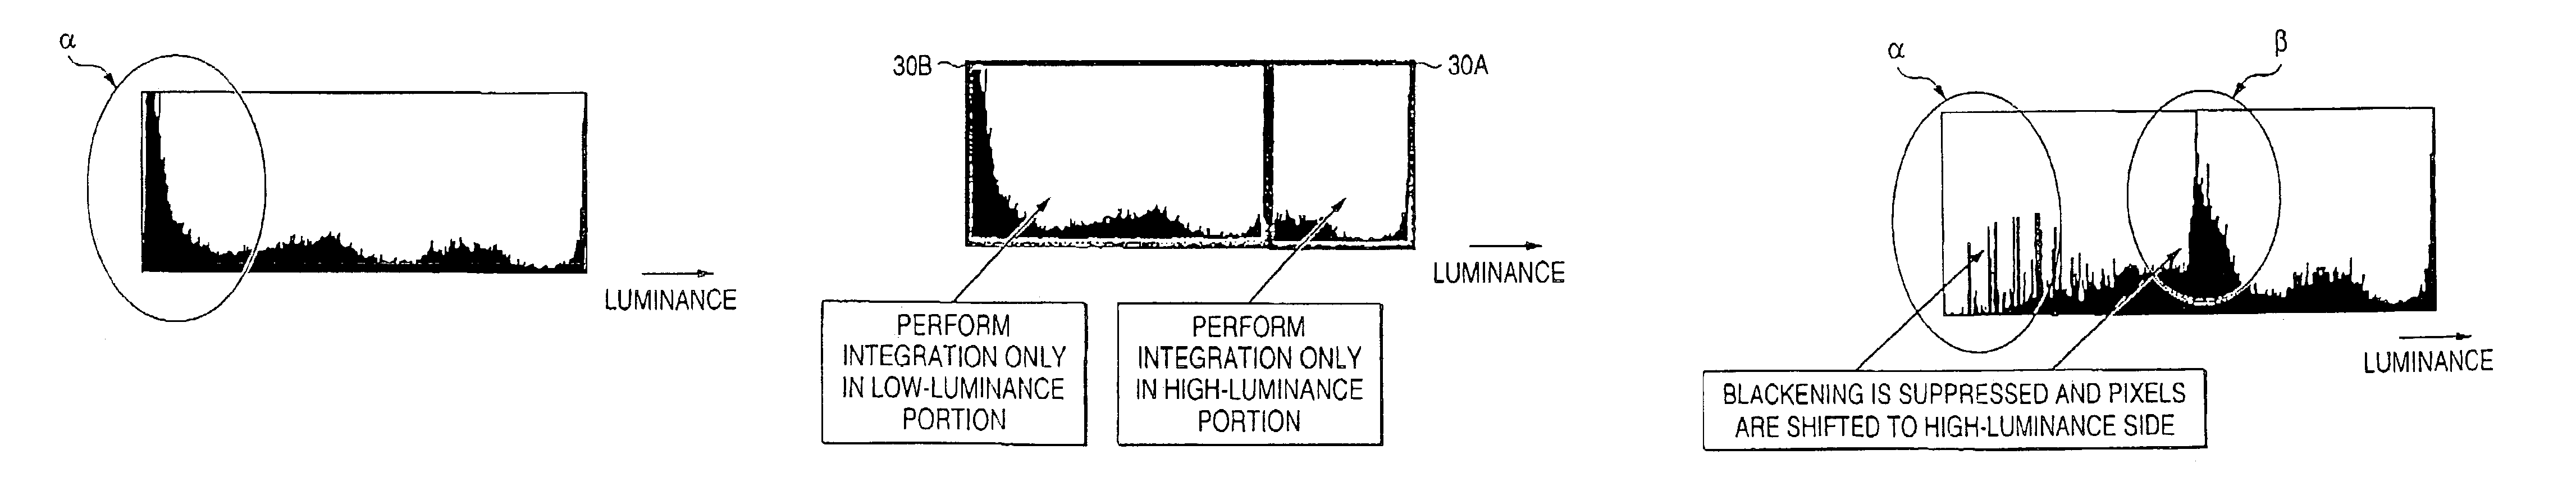 Image apparatus and method for compensating for high and low luminance image portions via exposure control and gamma correction